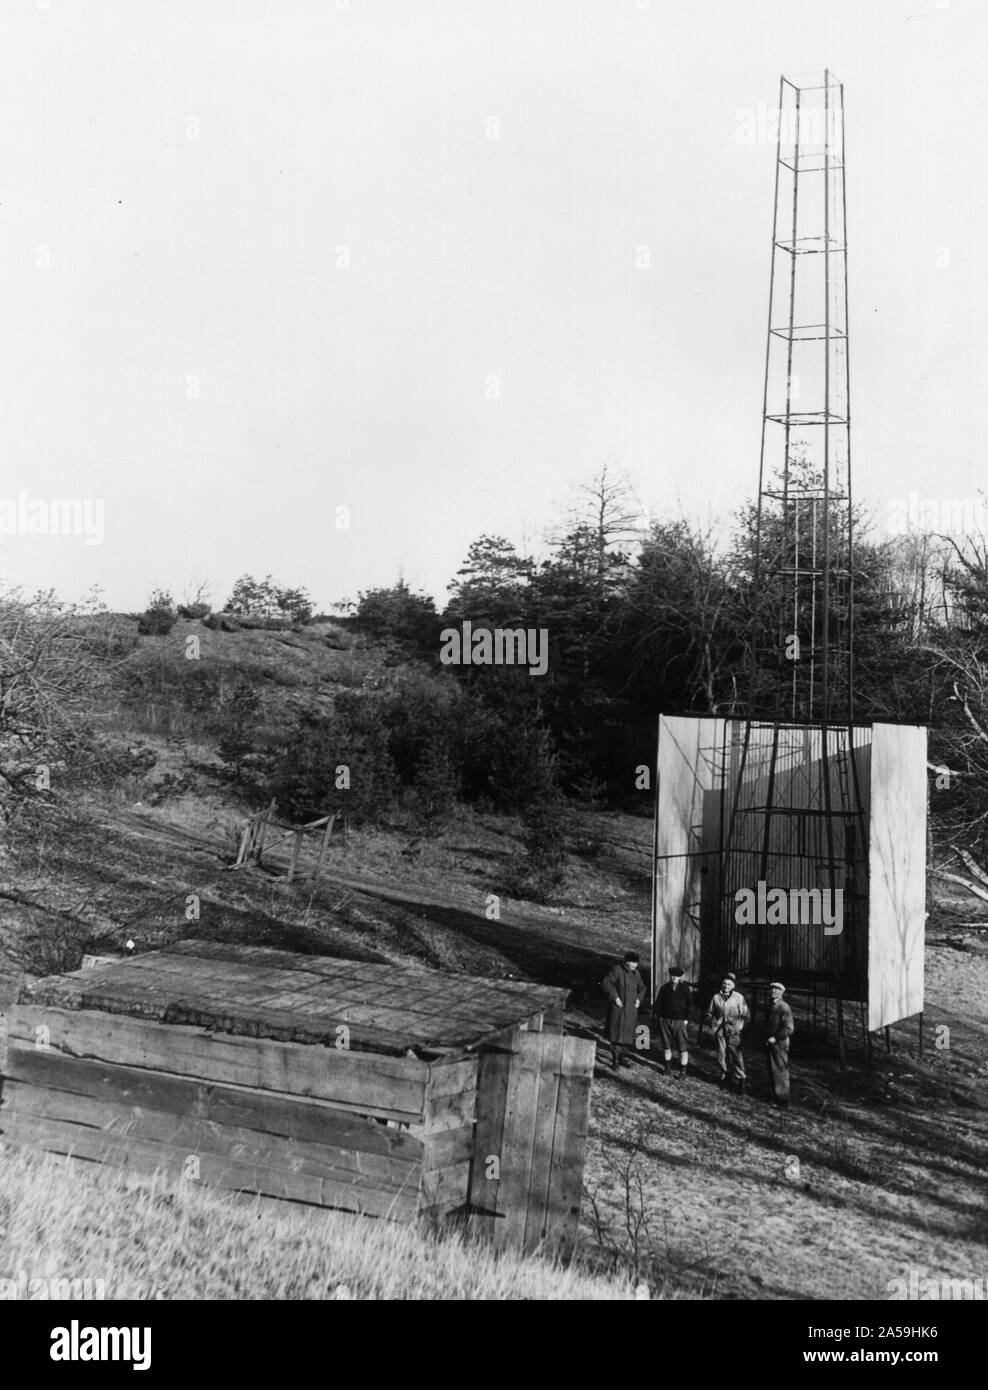 Dr. Robert H. Goddard's tower and shelter at the Army artillery range at Camp Devens, in Ayer, Massachusetts in the winter of 1929-1930. Goddard originally began testing rockets on his aunt's farm in Auburn, Massachusetts until the local police, fire department and townspeople became concerned about the noise and menace to the public the rockets created. Stock Photo